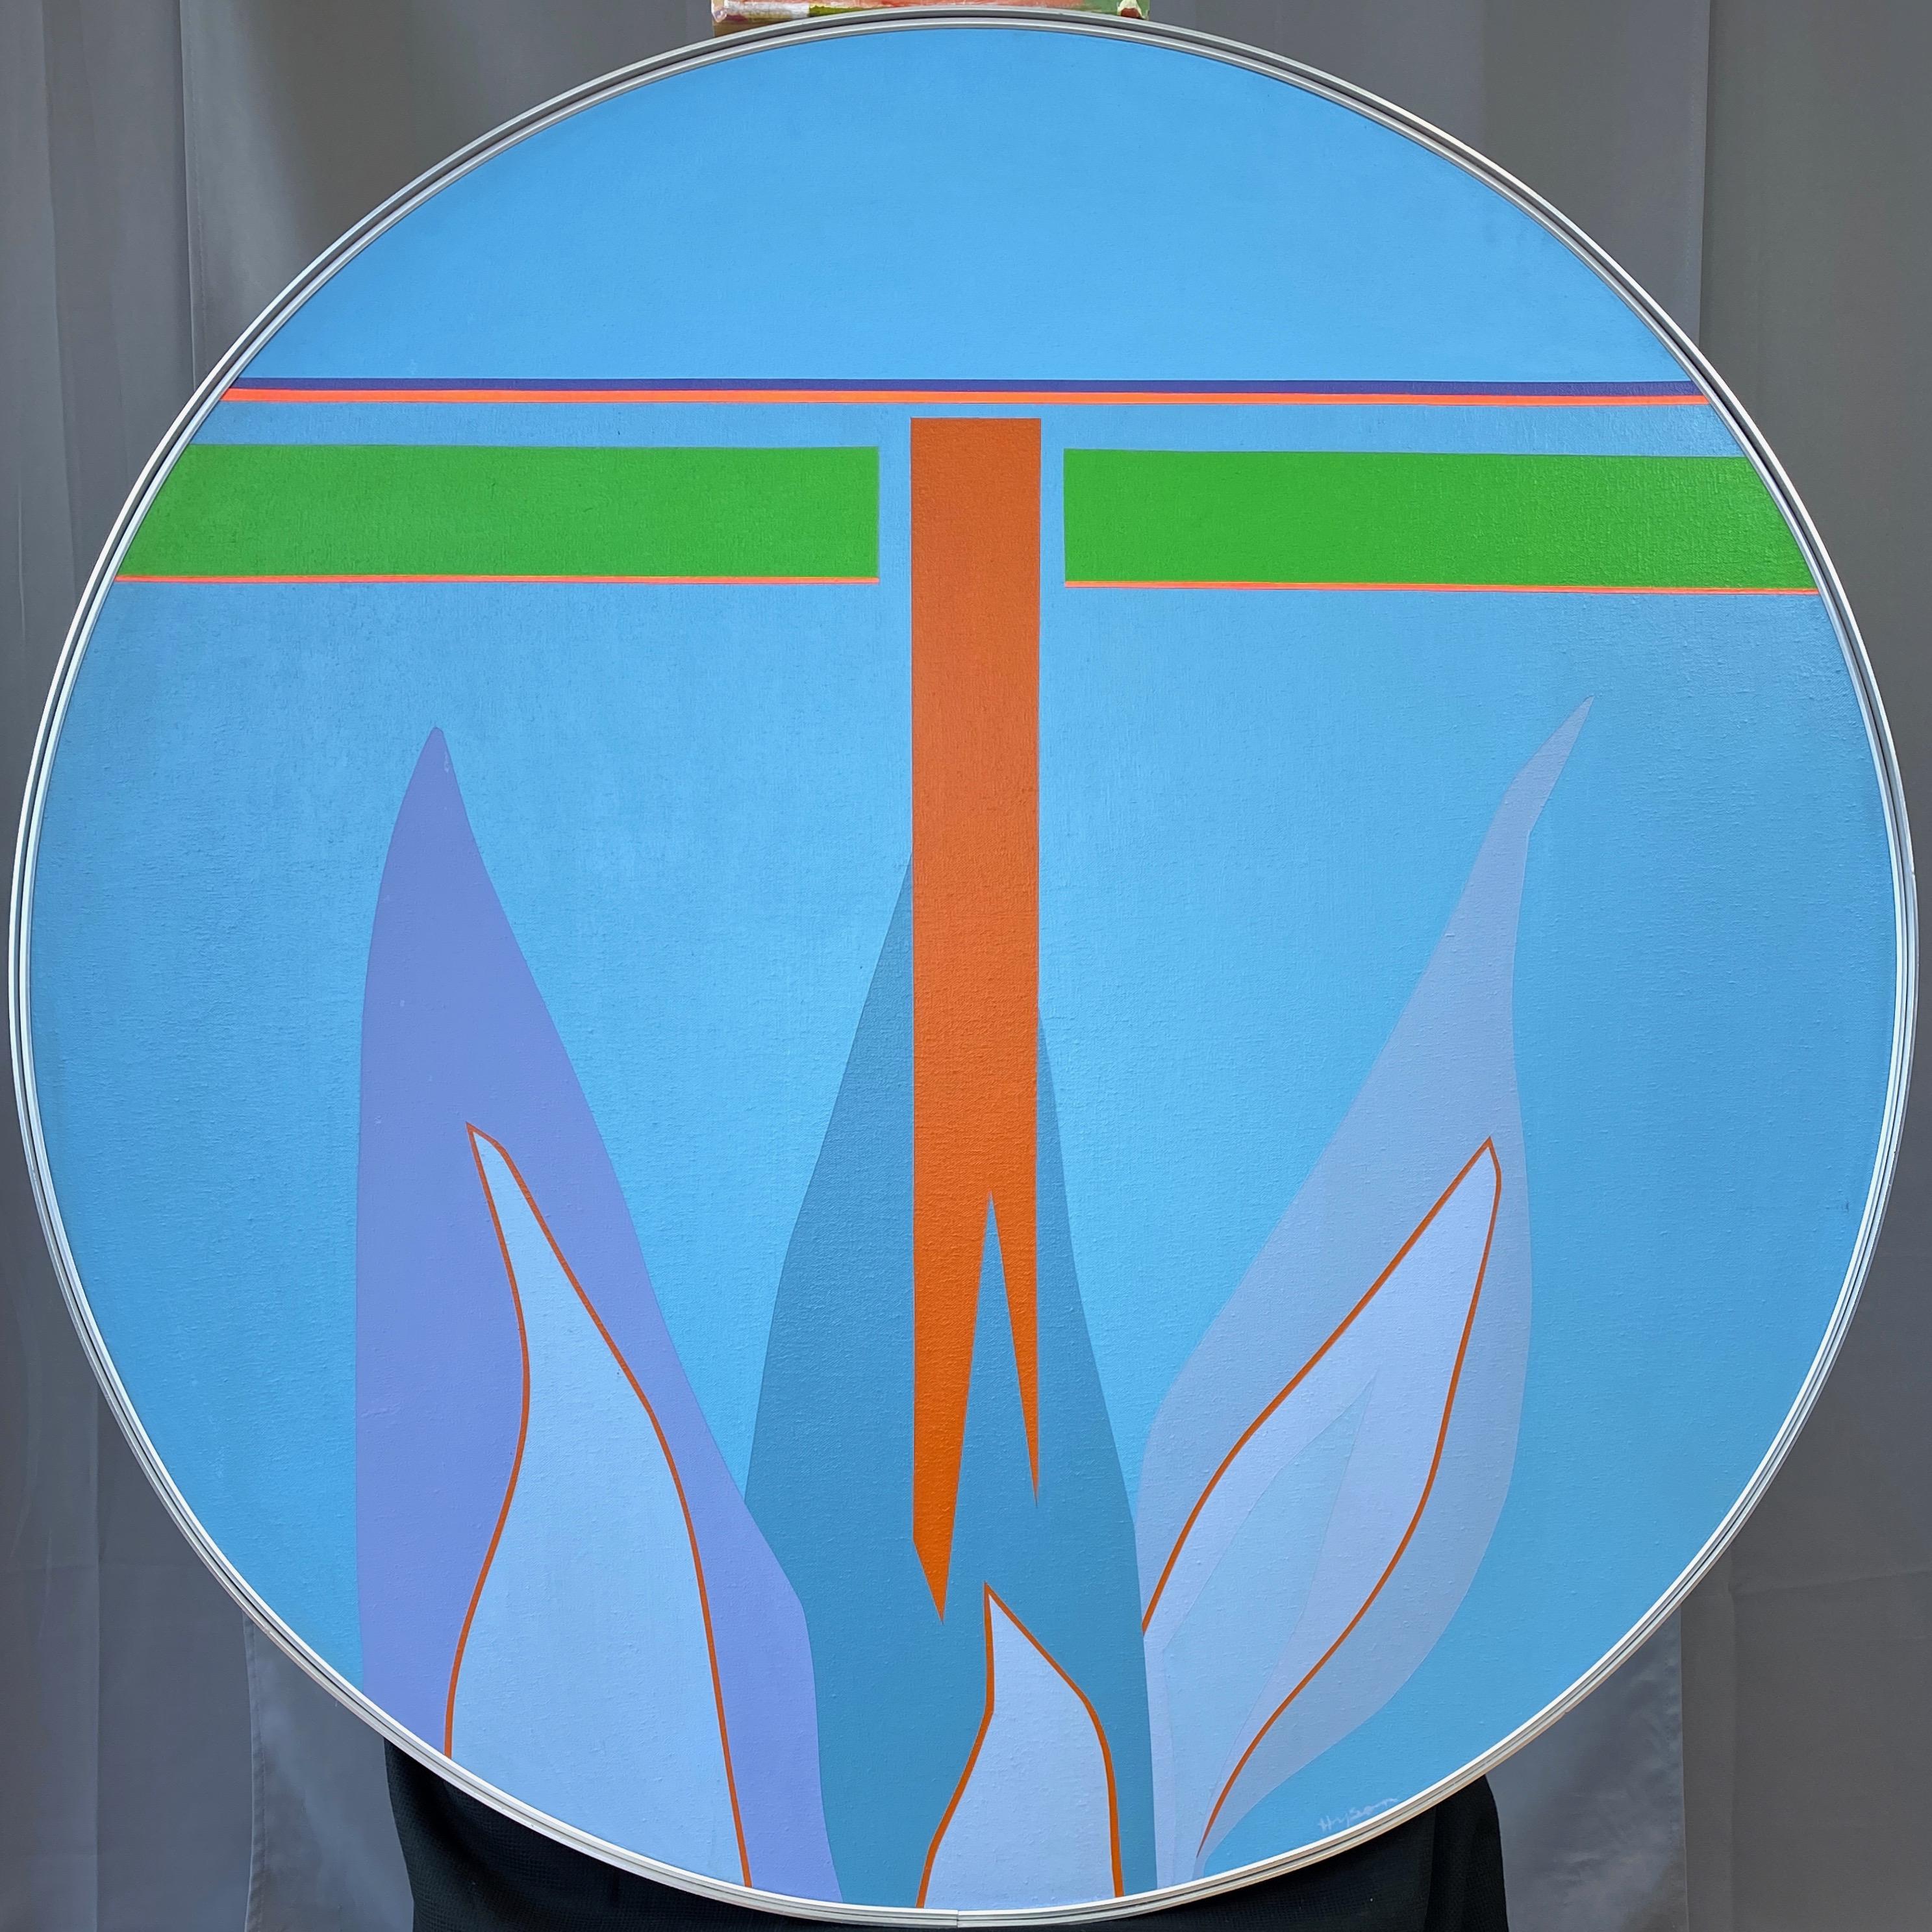 An extra-large round abstract minimalist acrylic painting by San Francisco artist Jean Hyson (b. 1934) titled “The Light Sown”. One of two works from the artist’s 1969 series of futuristic-looking paintings that we currently offer, the other being a